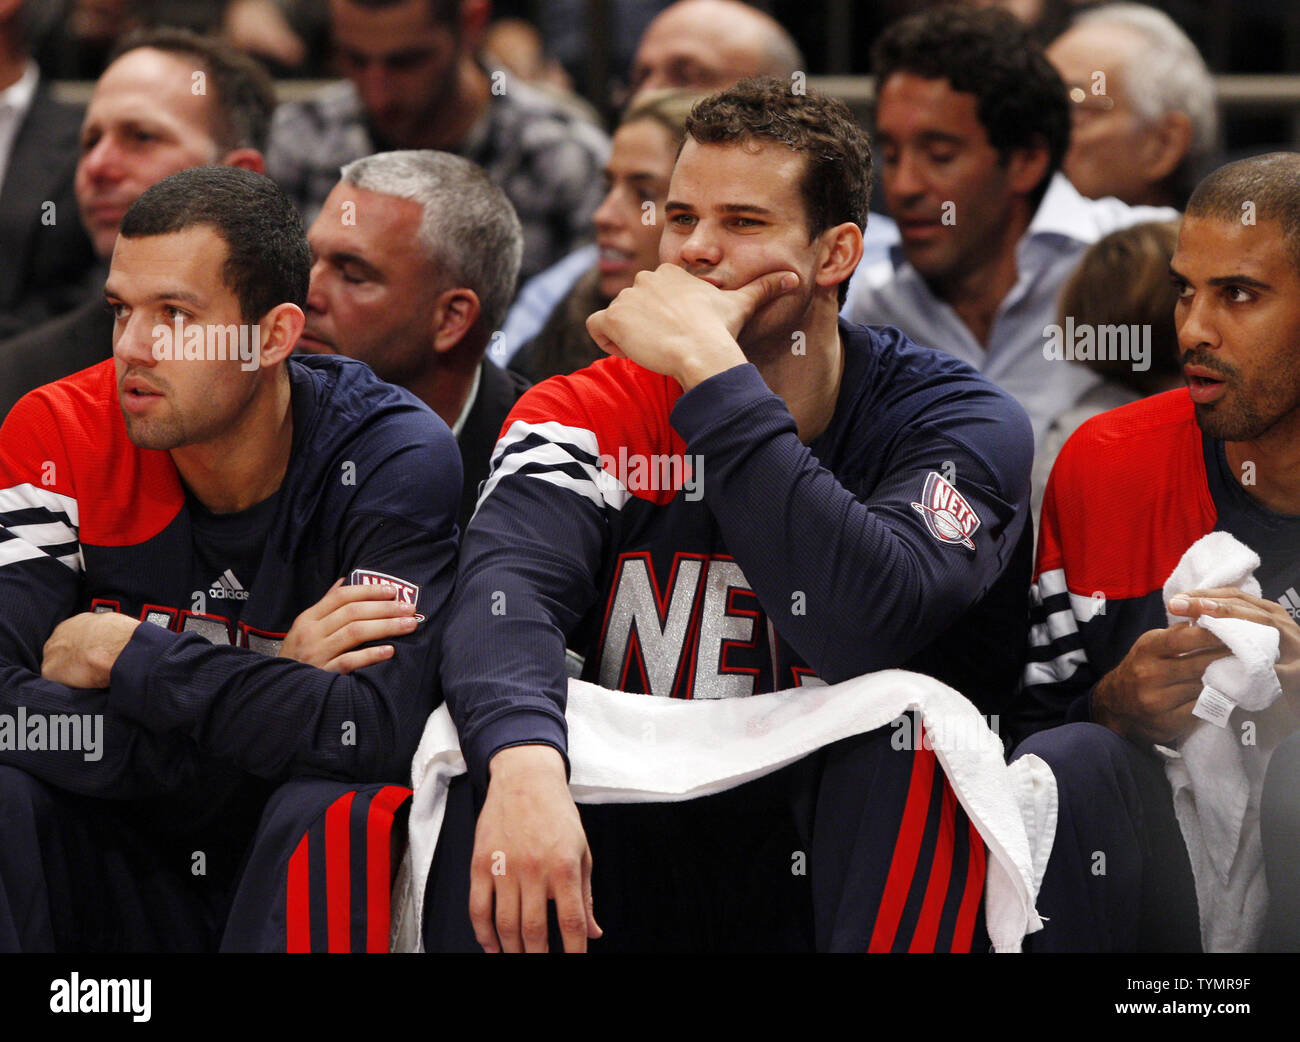 Photo: New Jersey Nets Kris Humphries at Madison Square Garden in New York  - NYP20111221115 